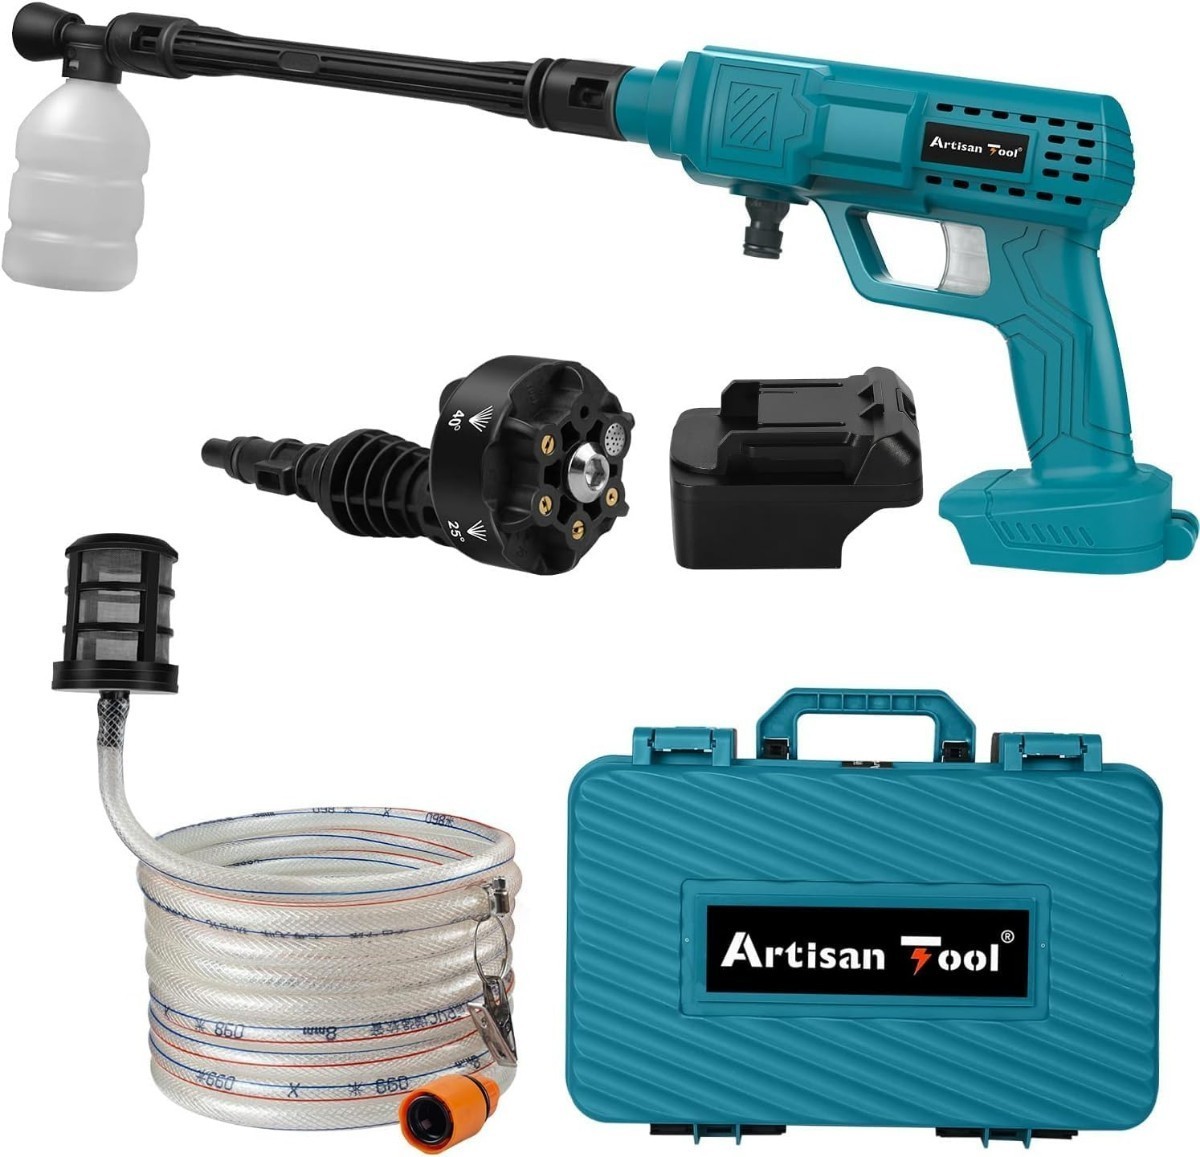  cordless high pressure washer 18V Hitachi high ko-kiBSL1860 BSL36A18 battery use possibility adaptor attaching Makita 18V BL1860 etc. new system correspondence receipt possible 